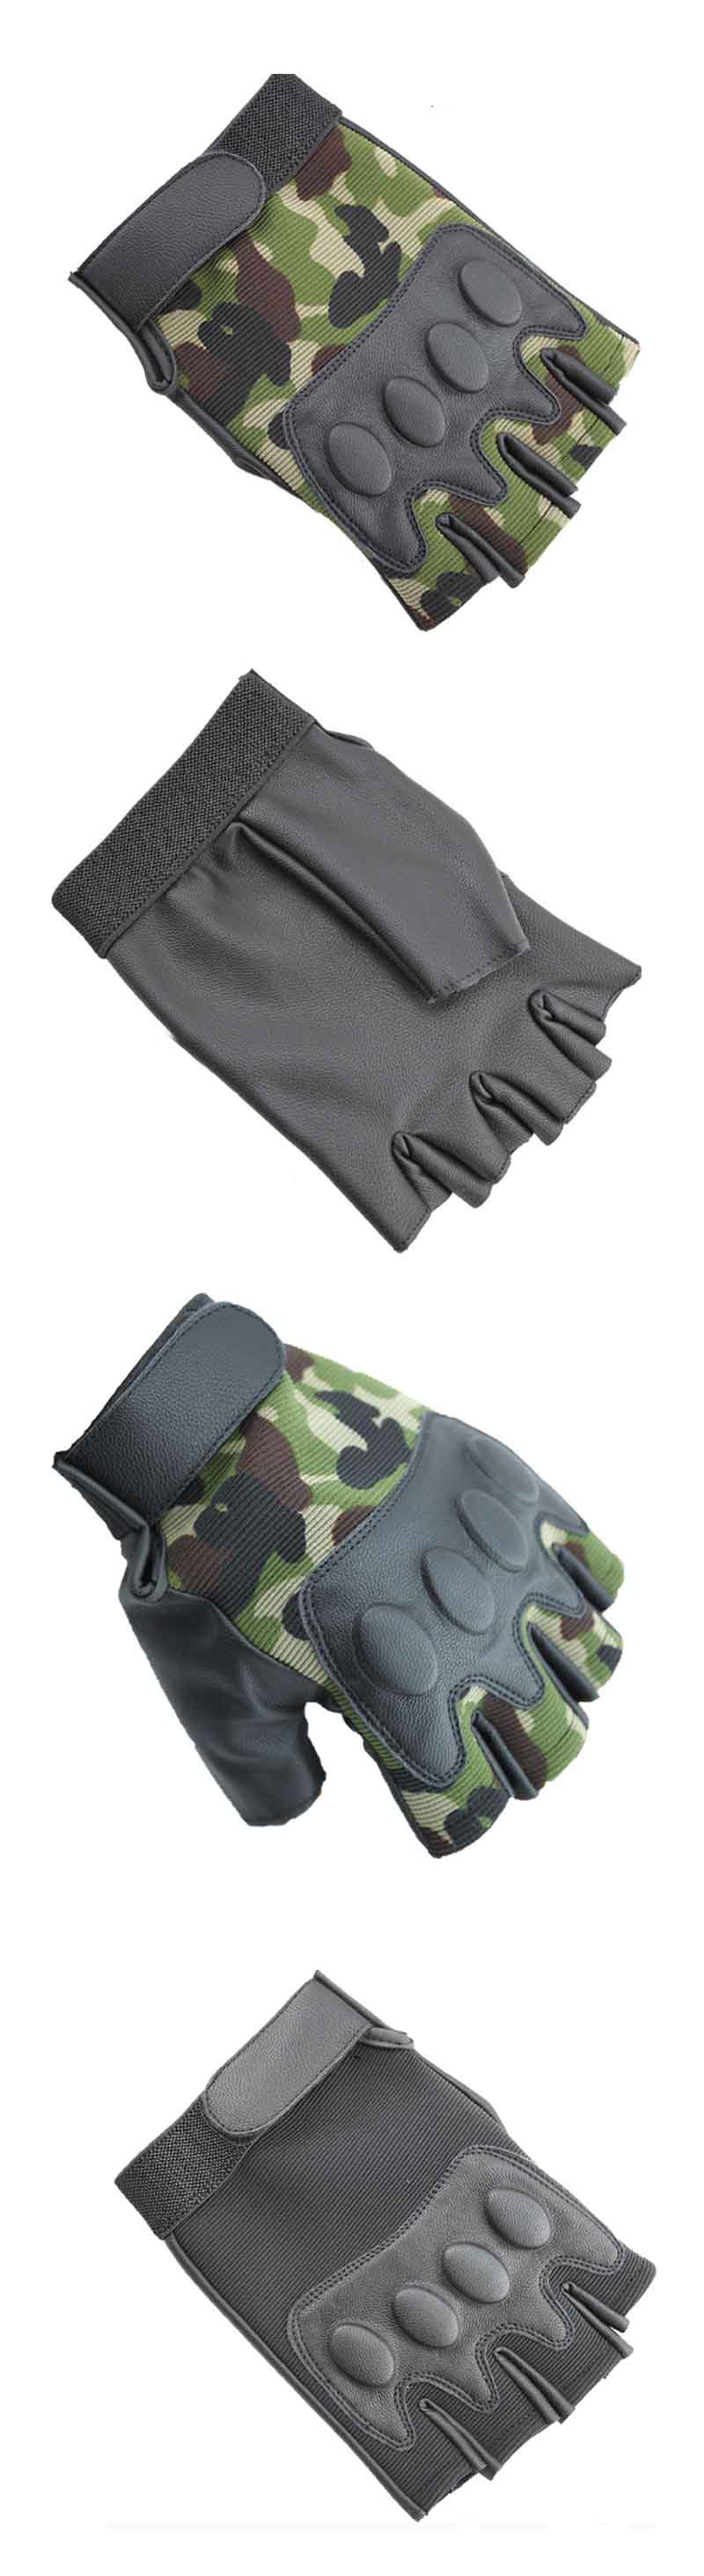 1Pair-KALOAD-Outdoor-Tactical-Glove-Sports-Climbing-Cycling-Fitness-Anti-skid-Gloves-Half-Finger-Glo-1452695-1